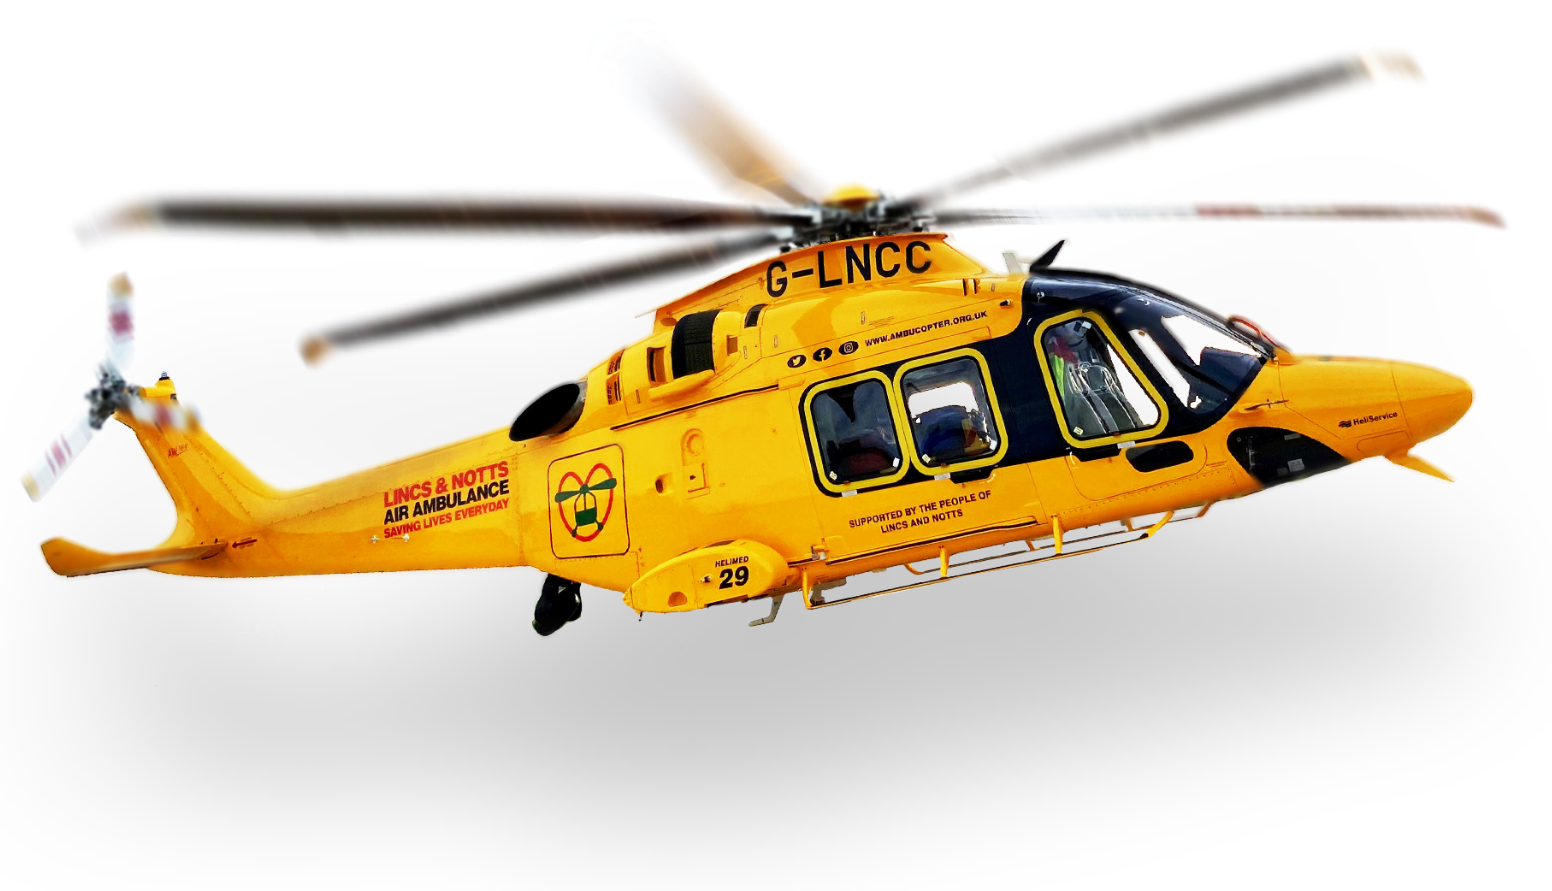 Lincs & Notts Air Ambulance Service Helicopter